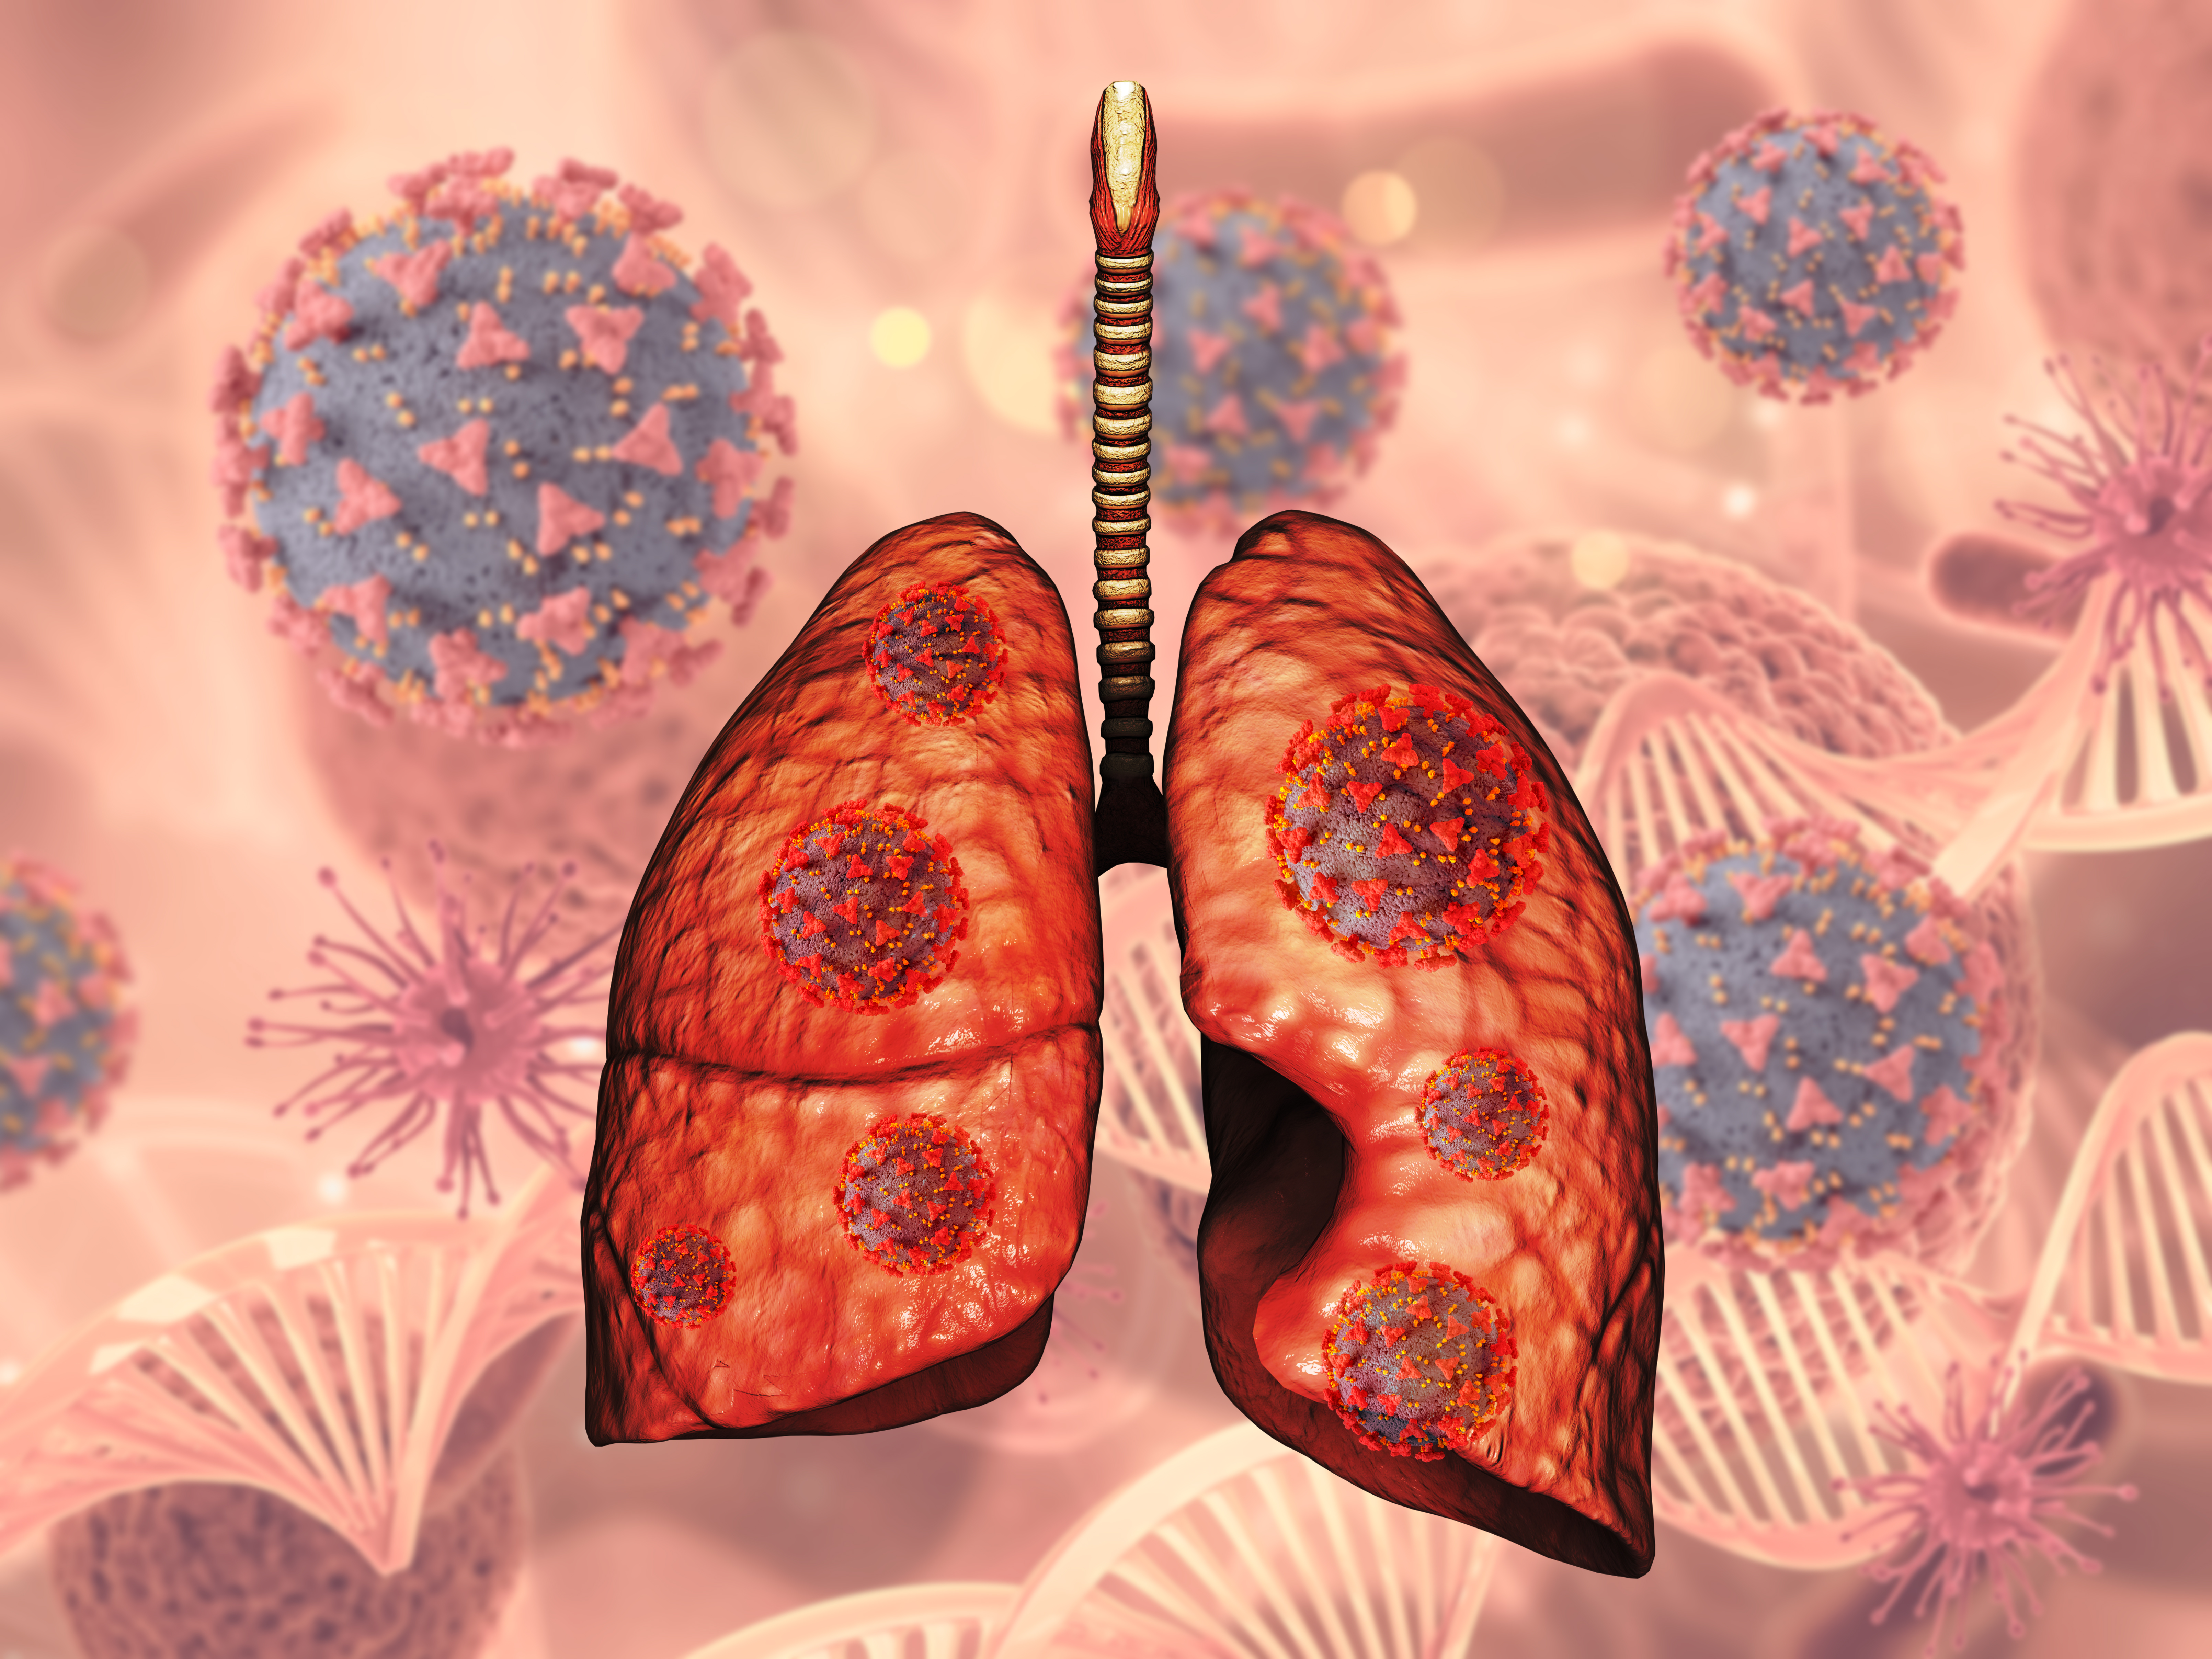 3d-render-medical-background-with-lungs-covid-19-virus-cells